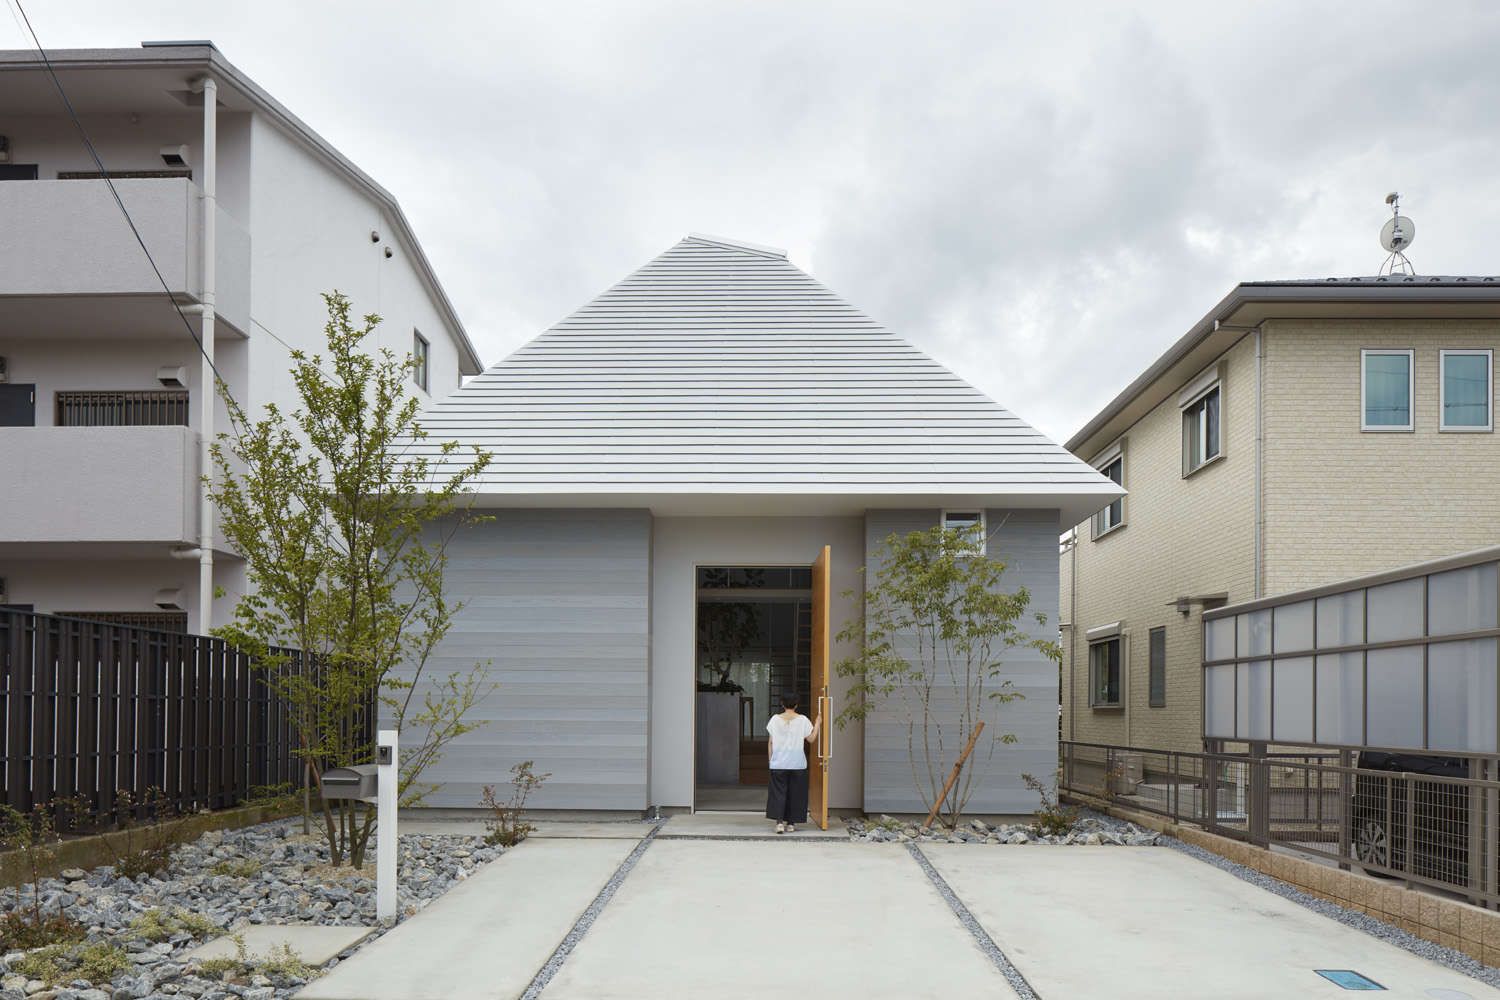 House in Iwakura by Airhouse